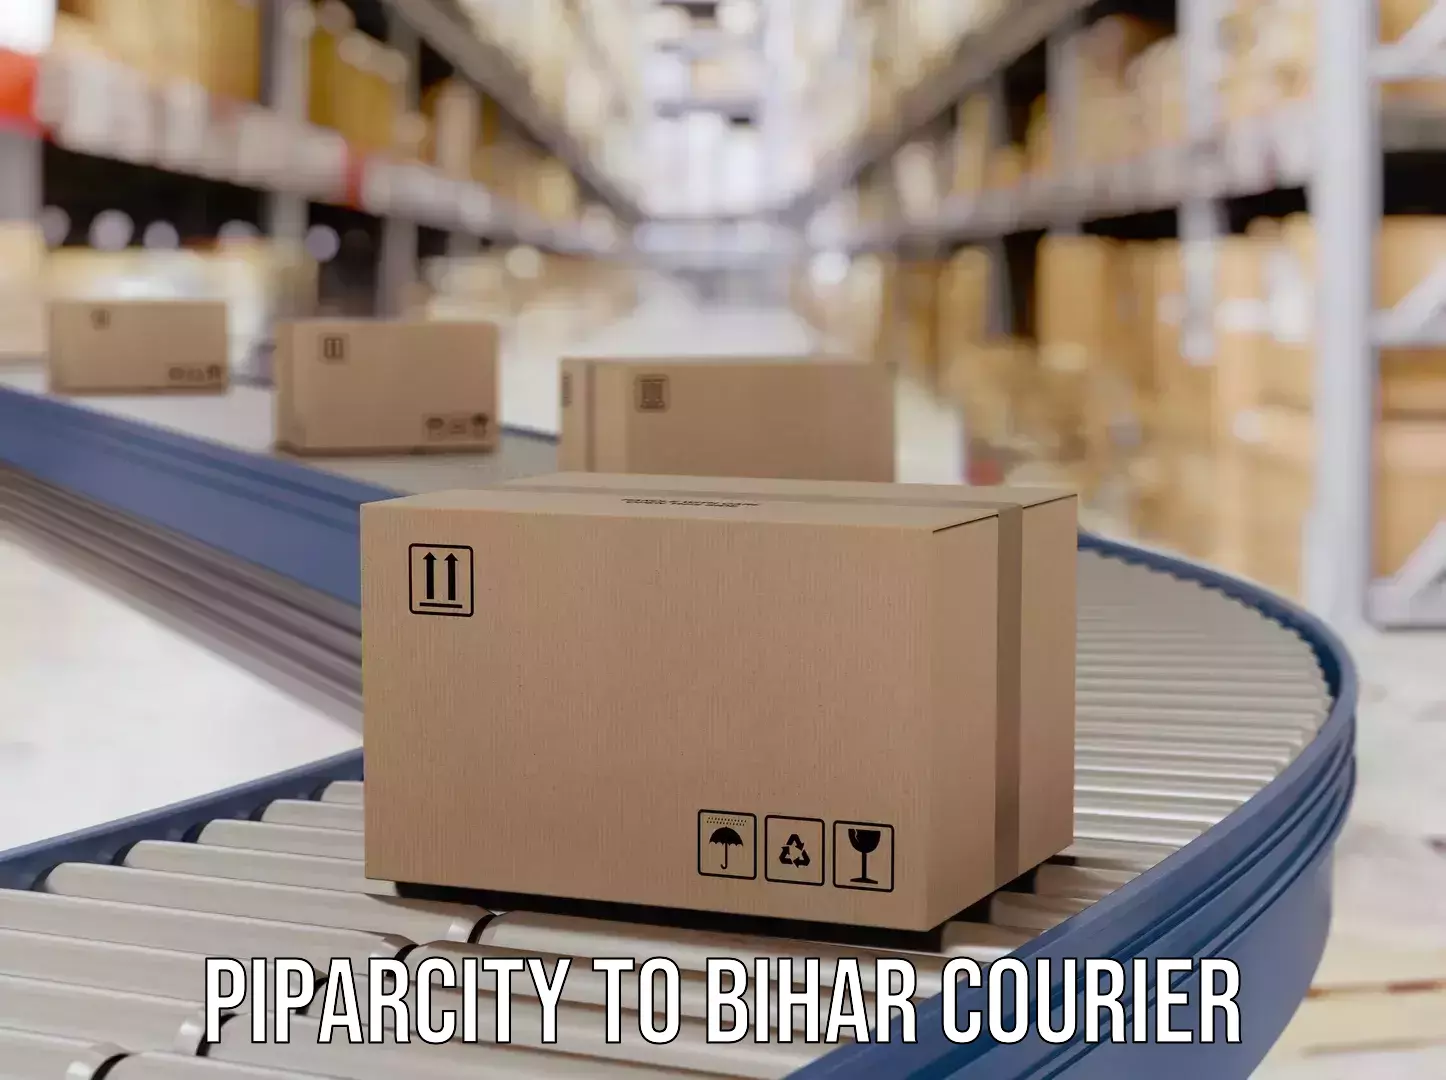 Courier service booking Piparcity to Bihar